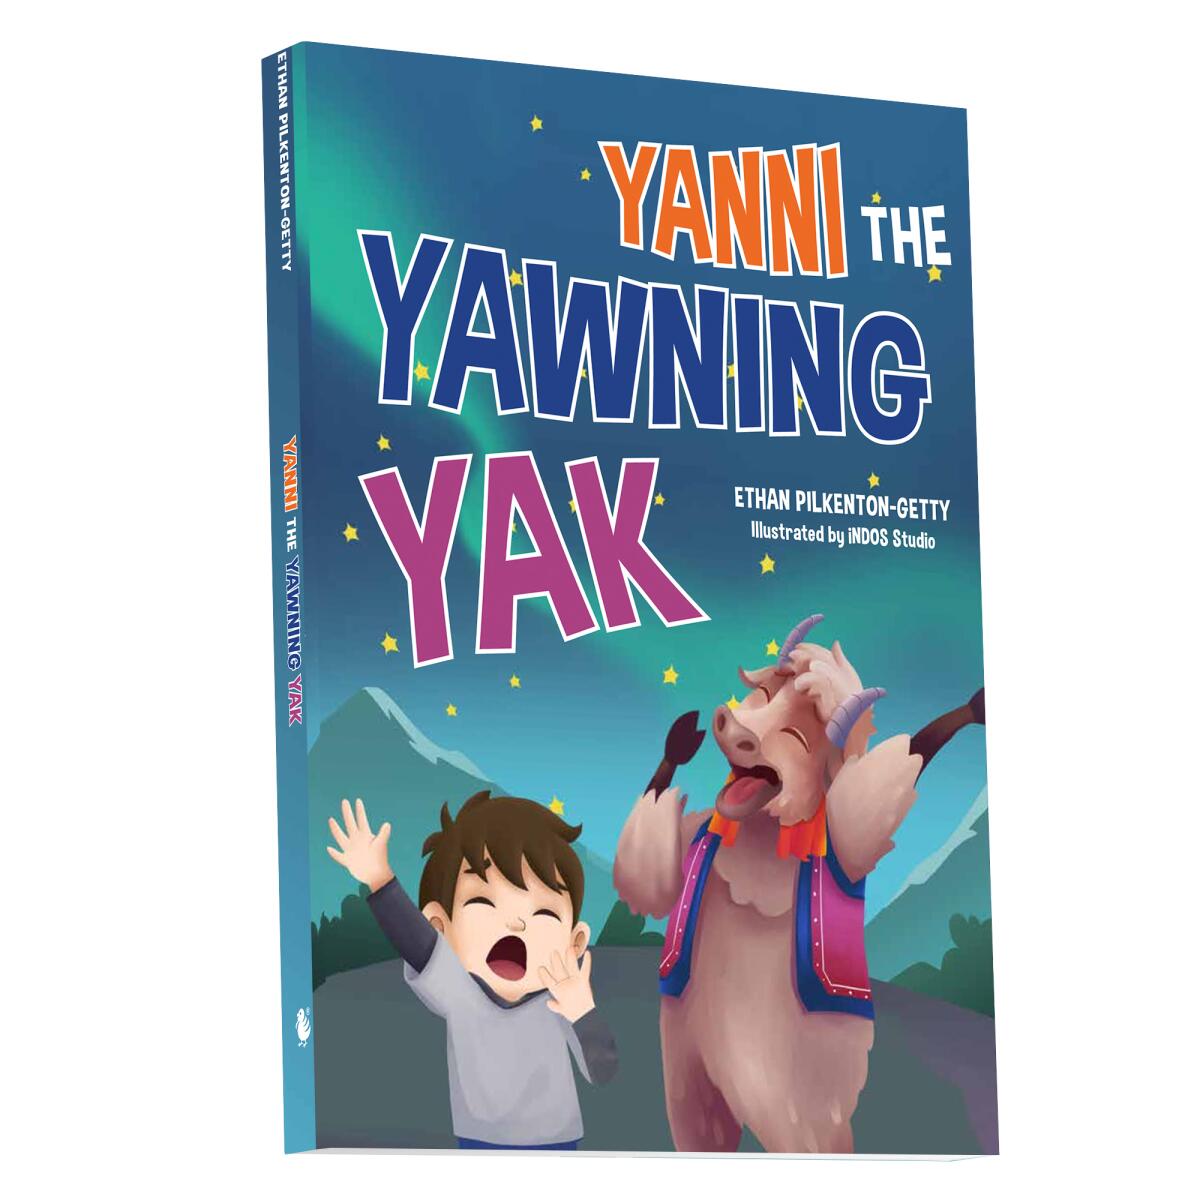 "Yanni the Yawning Yak" hopes to make bedtime more efficient by encouraging multiple yawns while reading.